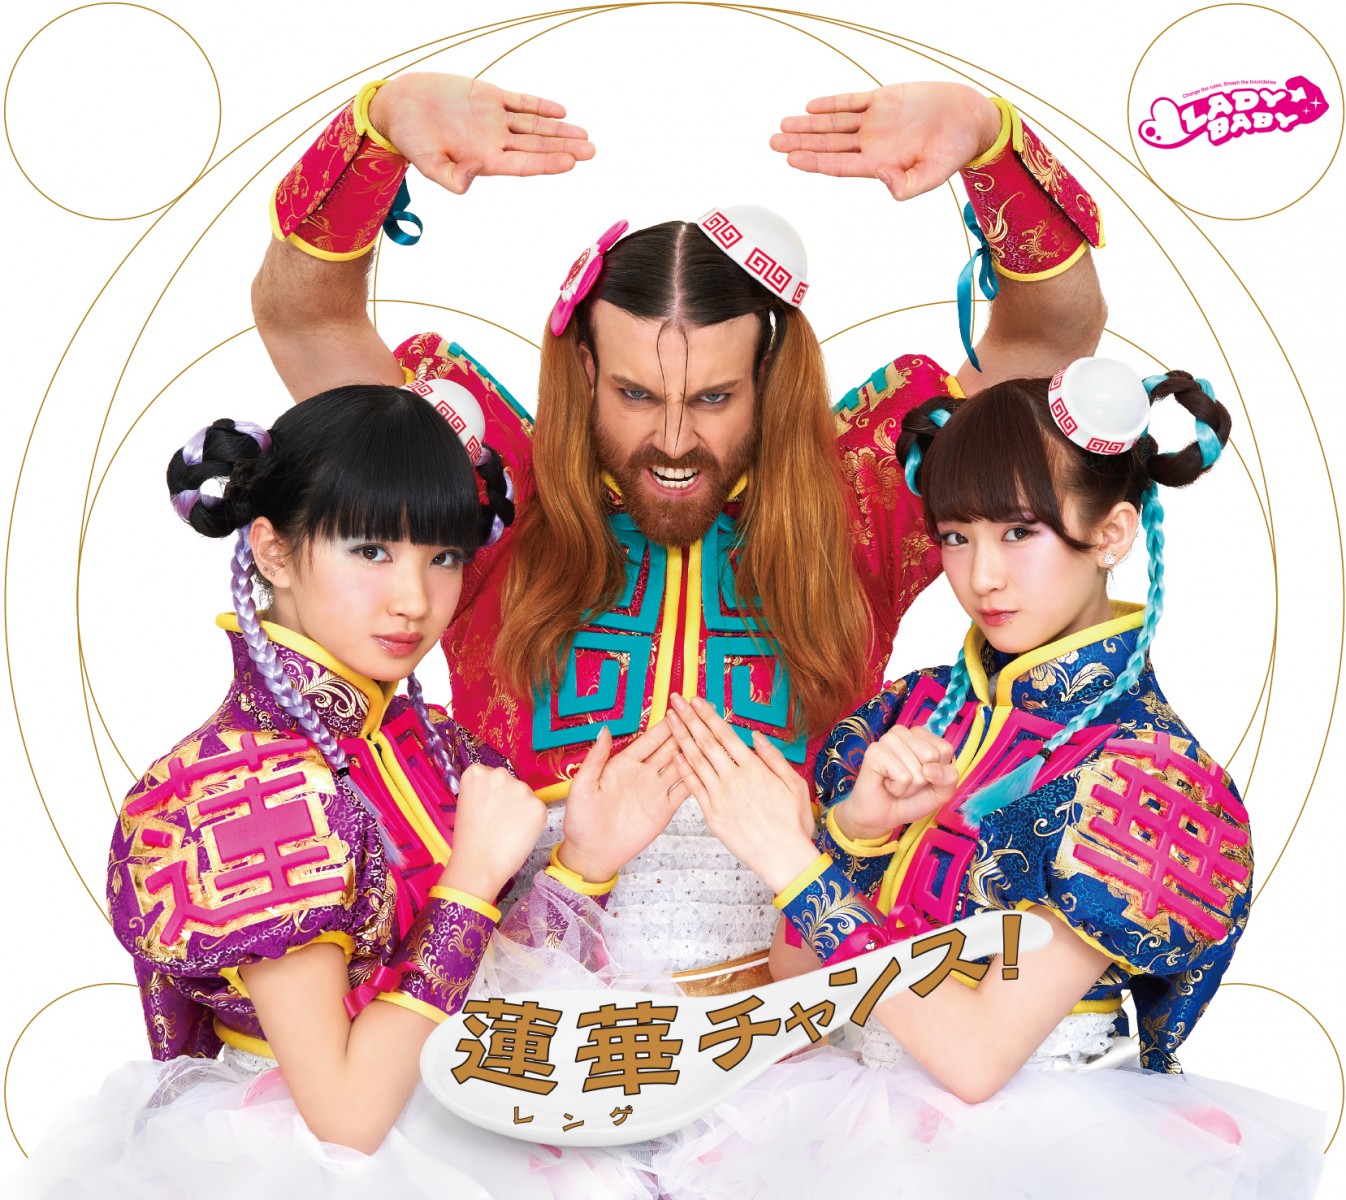 Get a Chance! LADYBABY Unveils New Artworks and Details for Upcoming Single “Renge Chance!”